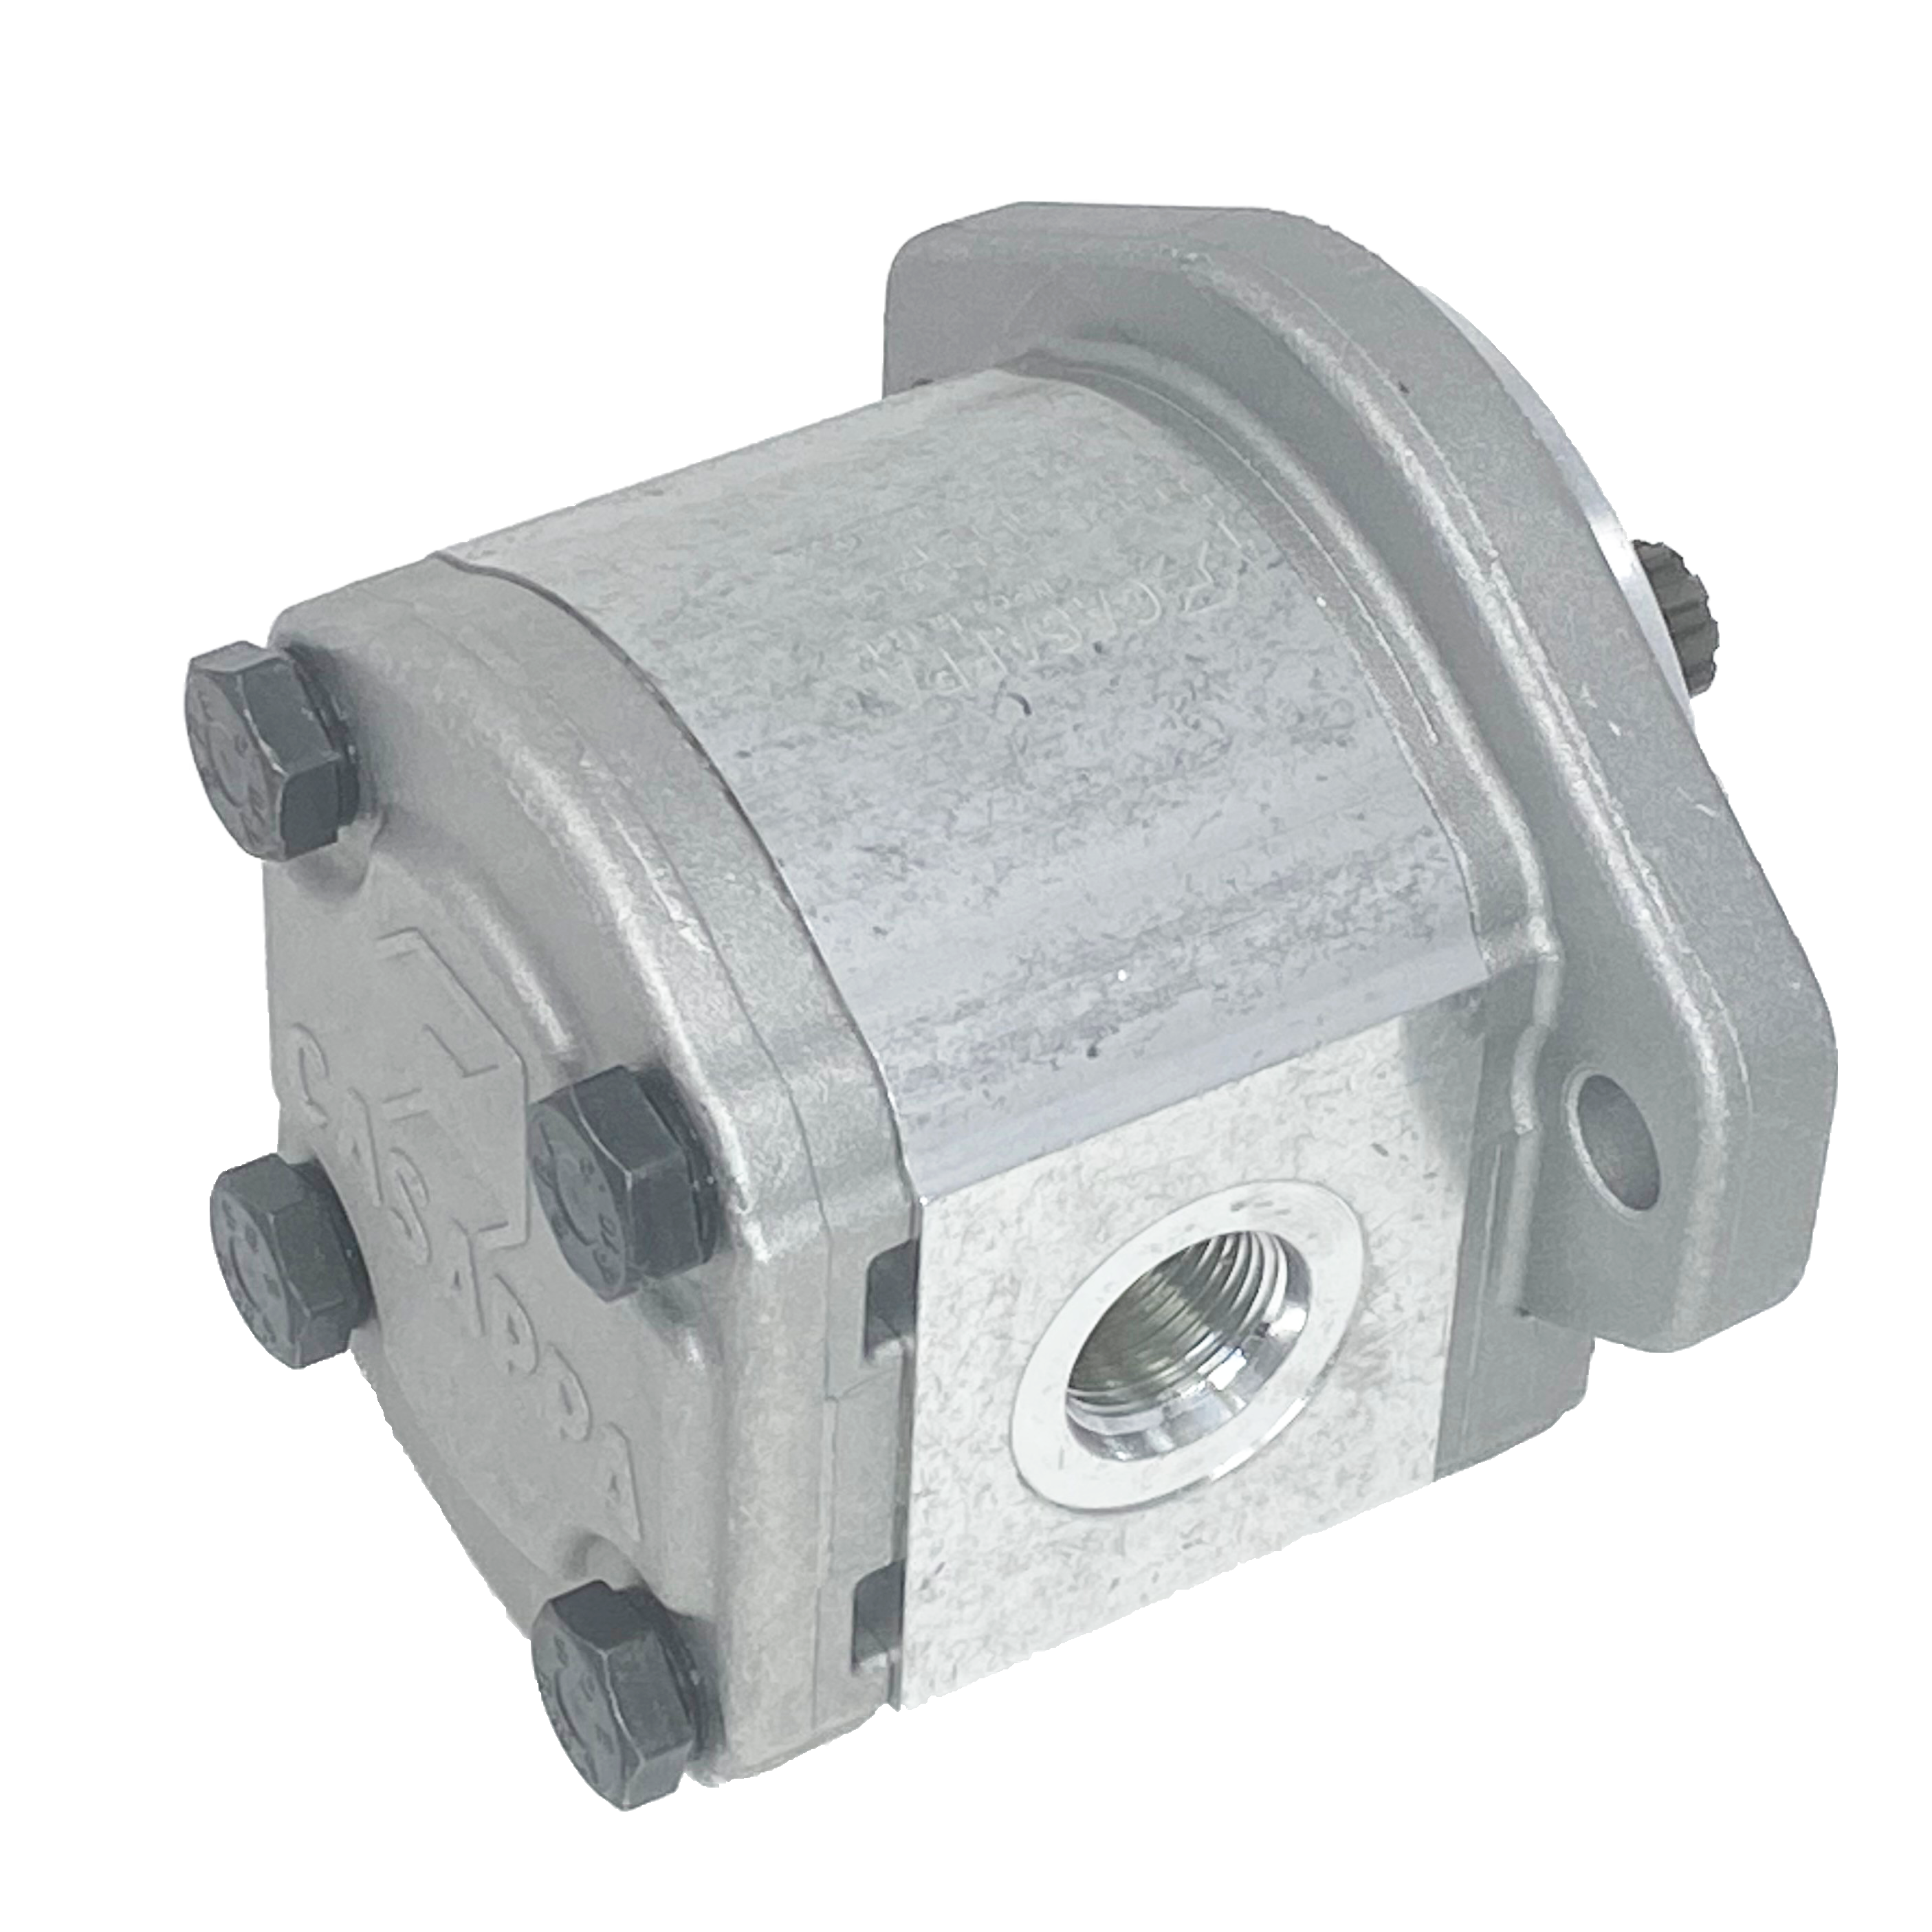 PLP20.14S0-49S1-LOD/OC-N-EL : Casappa Polaris Gear Pump, 14.53cc, 3625psi Rated, 3500RPM, CCW, 5/8" Keyed Shaft, SAE A 2-Bolt Flange, 1" #16 SAE Inlet, 0.625 (5/8") #10 SAE Outlet, Aluminum Body & Flange